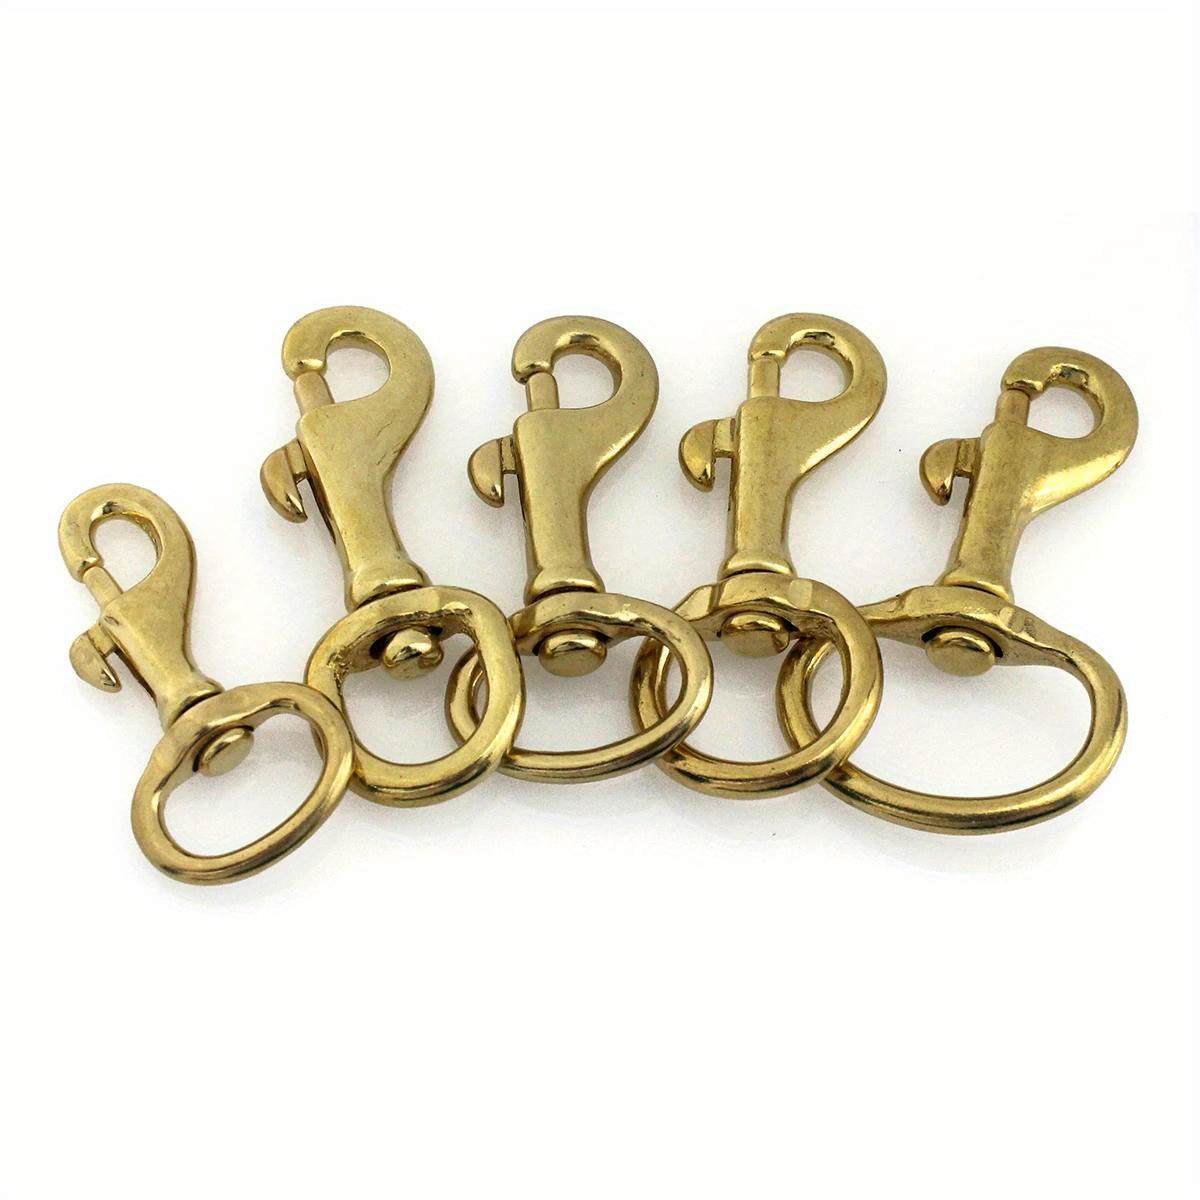 45mm Hook and Eye Clasp, Large Clasp, Necklace Clasp, Single